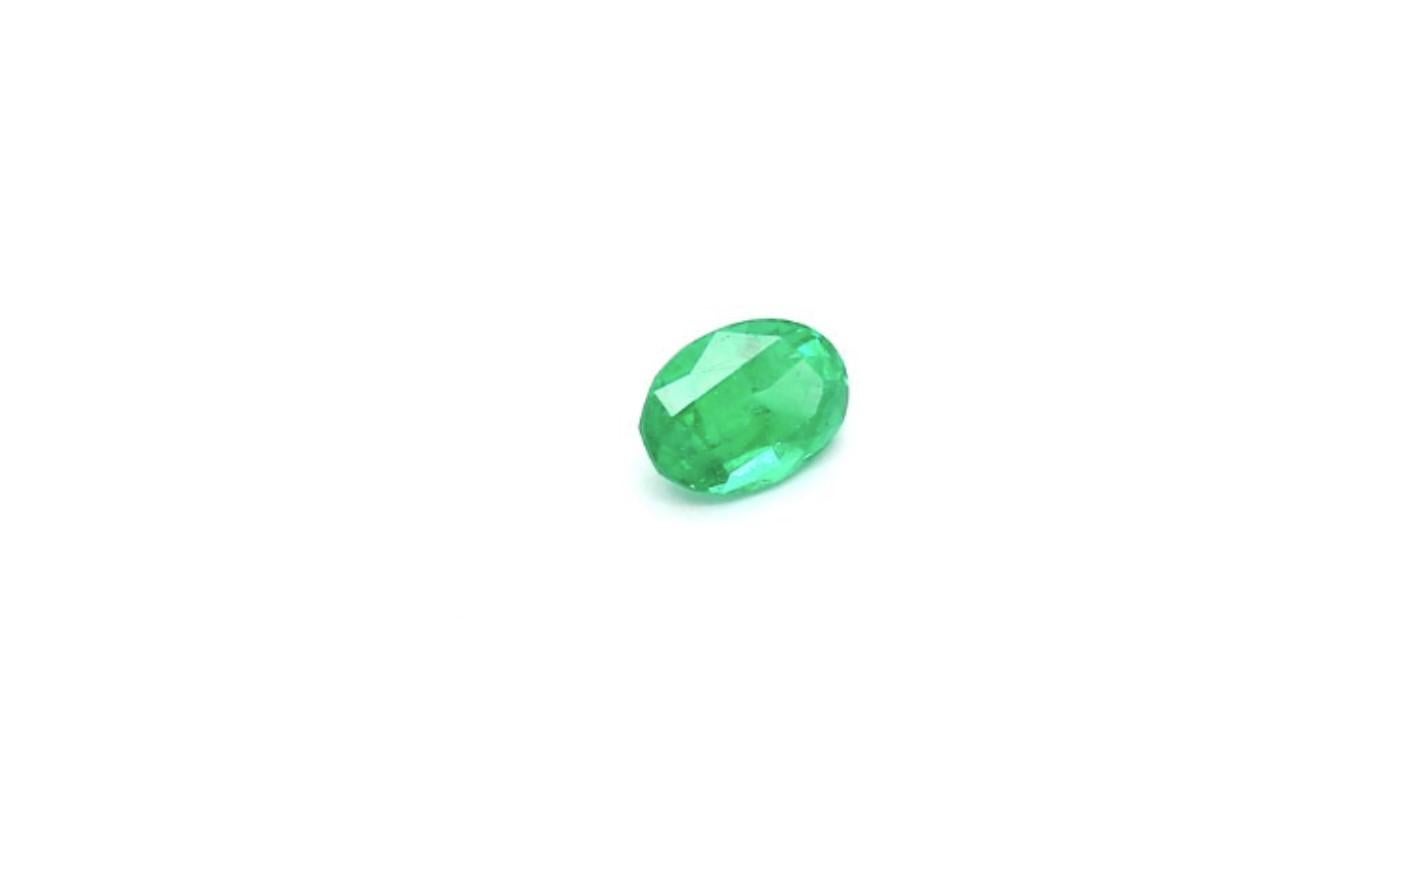 Modern Vivid Oval Shape Emerald Gem from Russia 0.51 Carat Weight ICL Certified For Sale